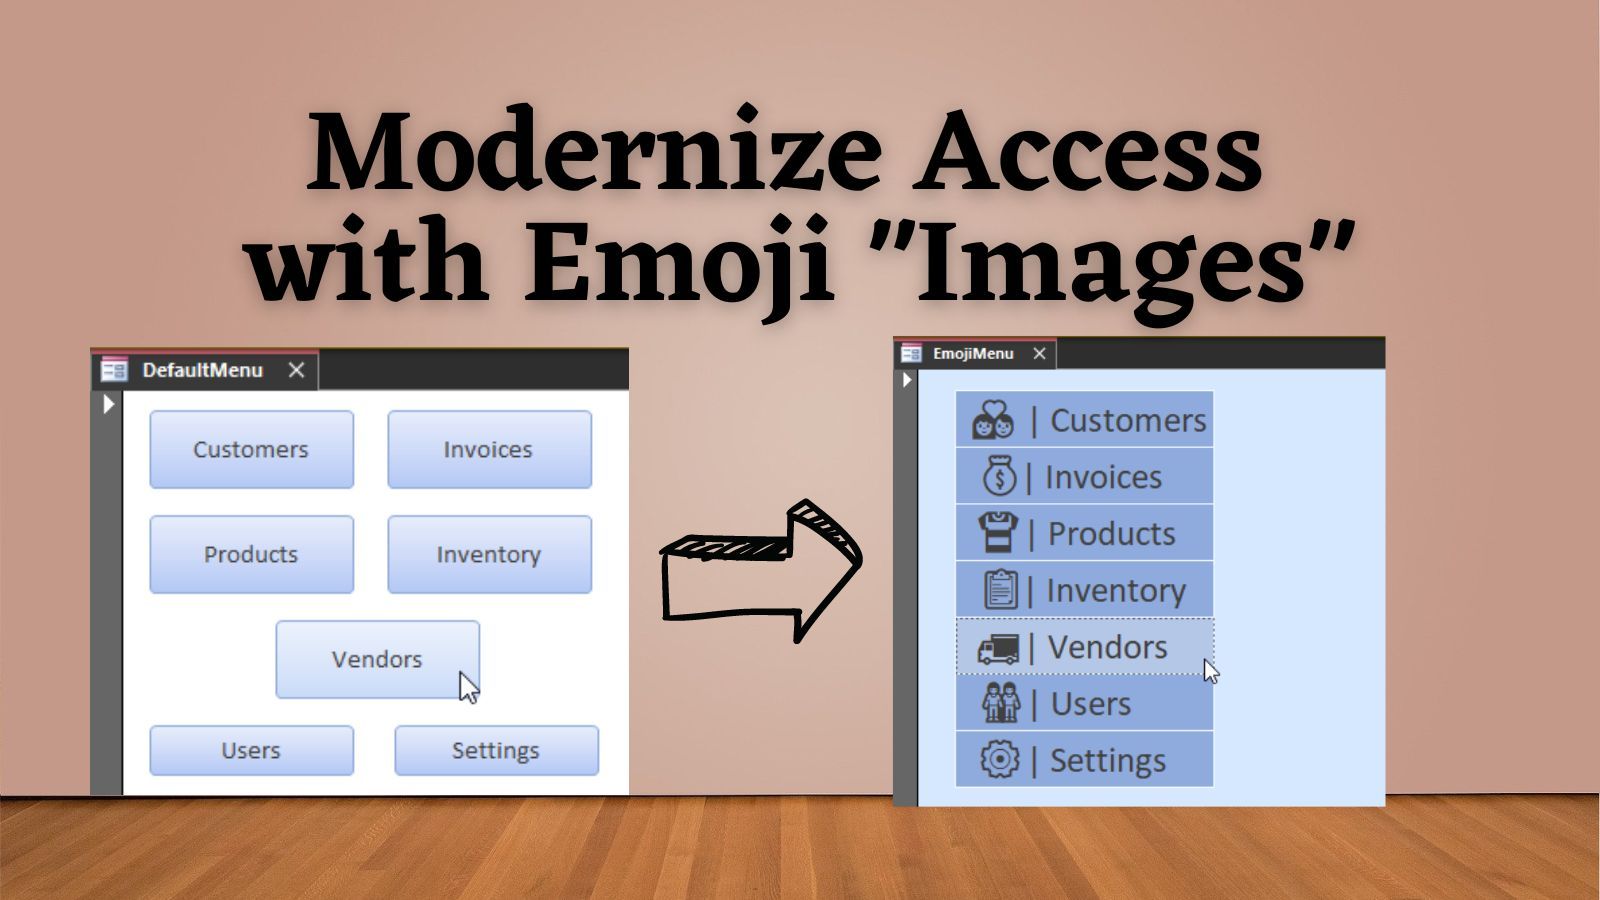 Using Emoji as Button "Images" in Access